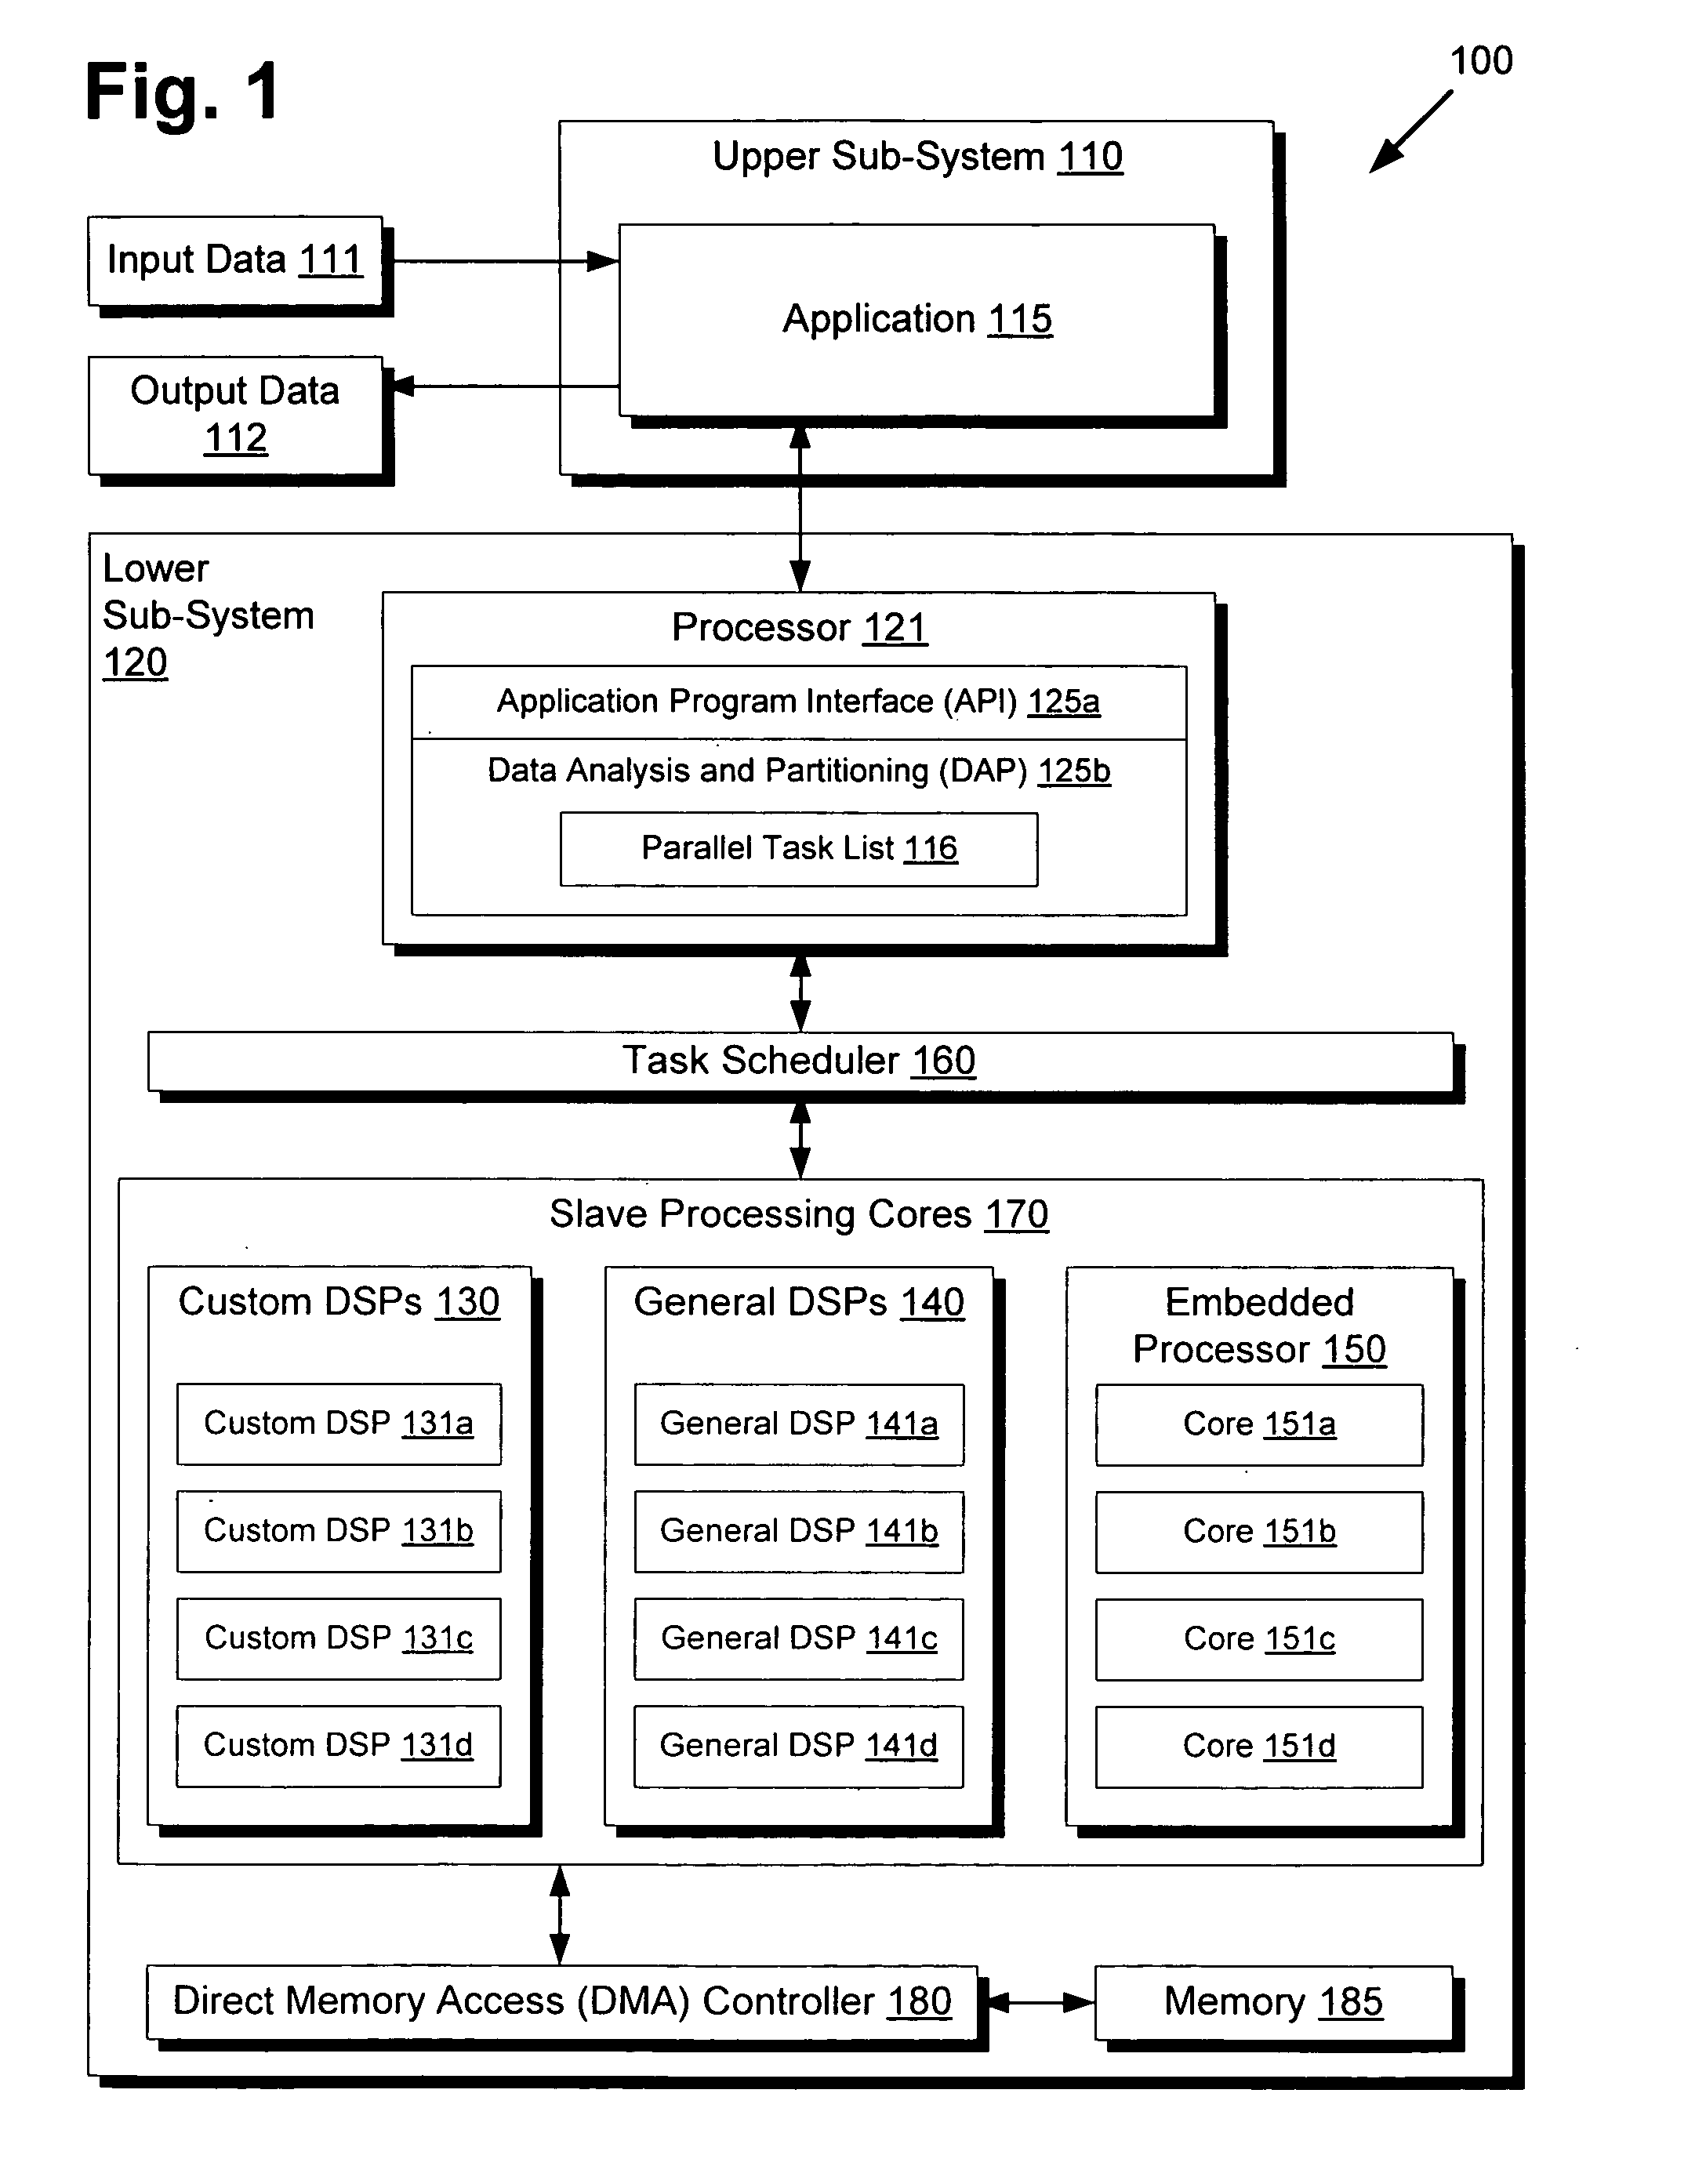 Highly distributed parallel processing on multi-core device